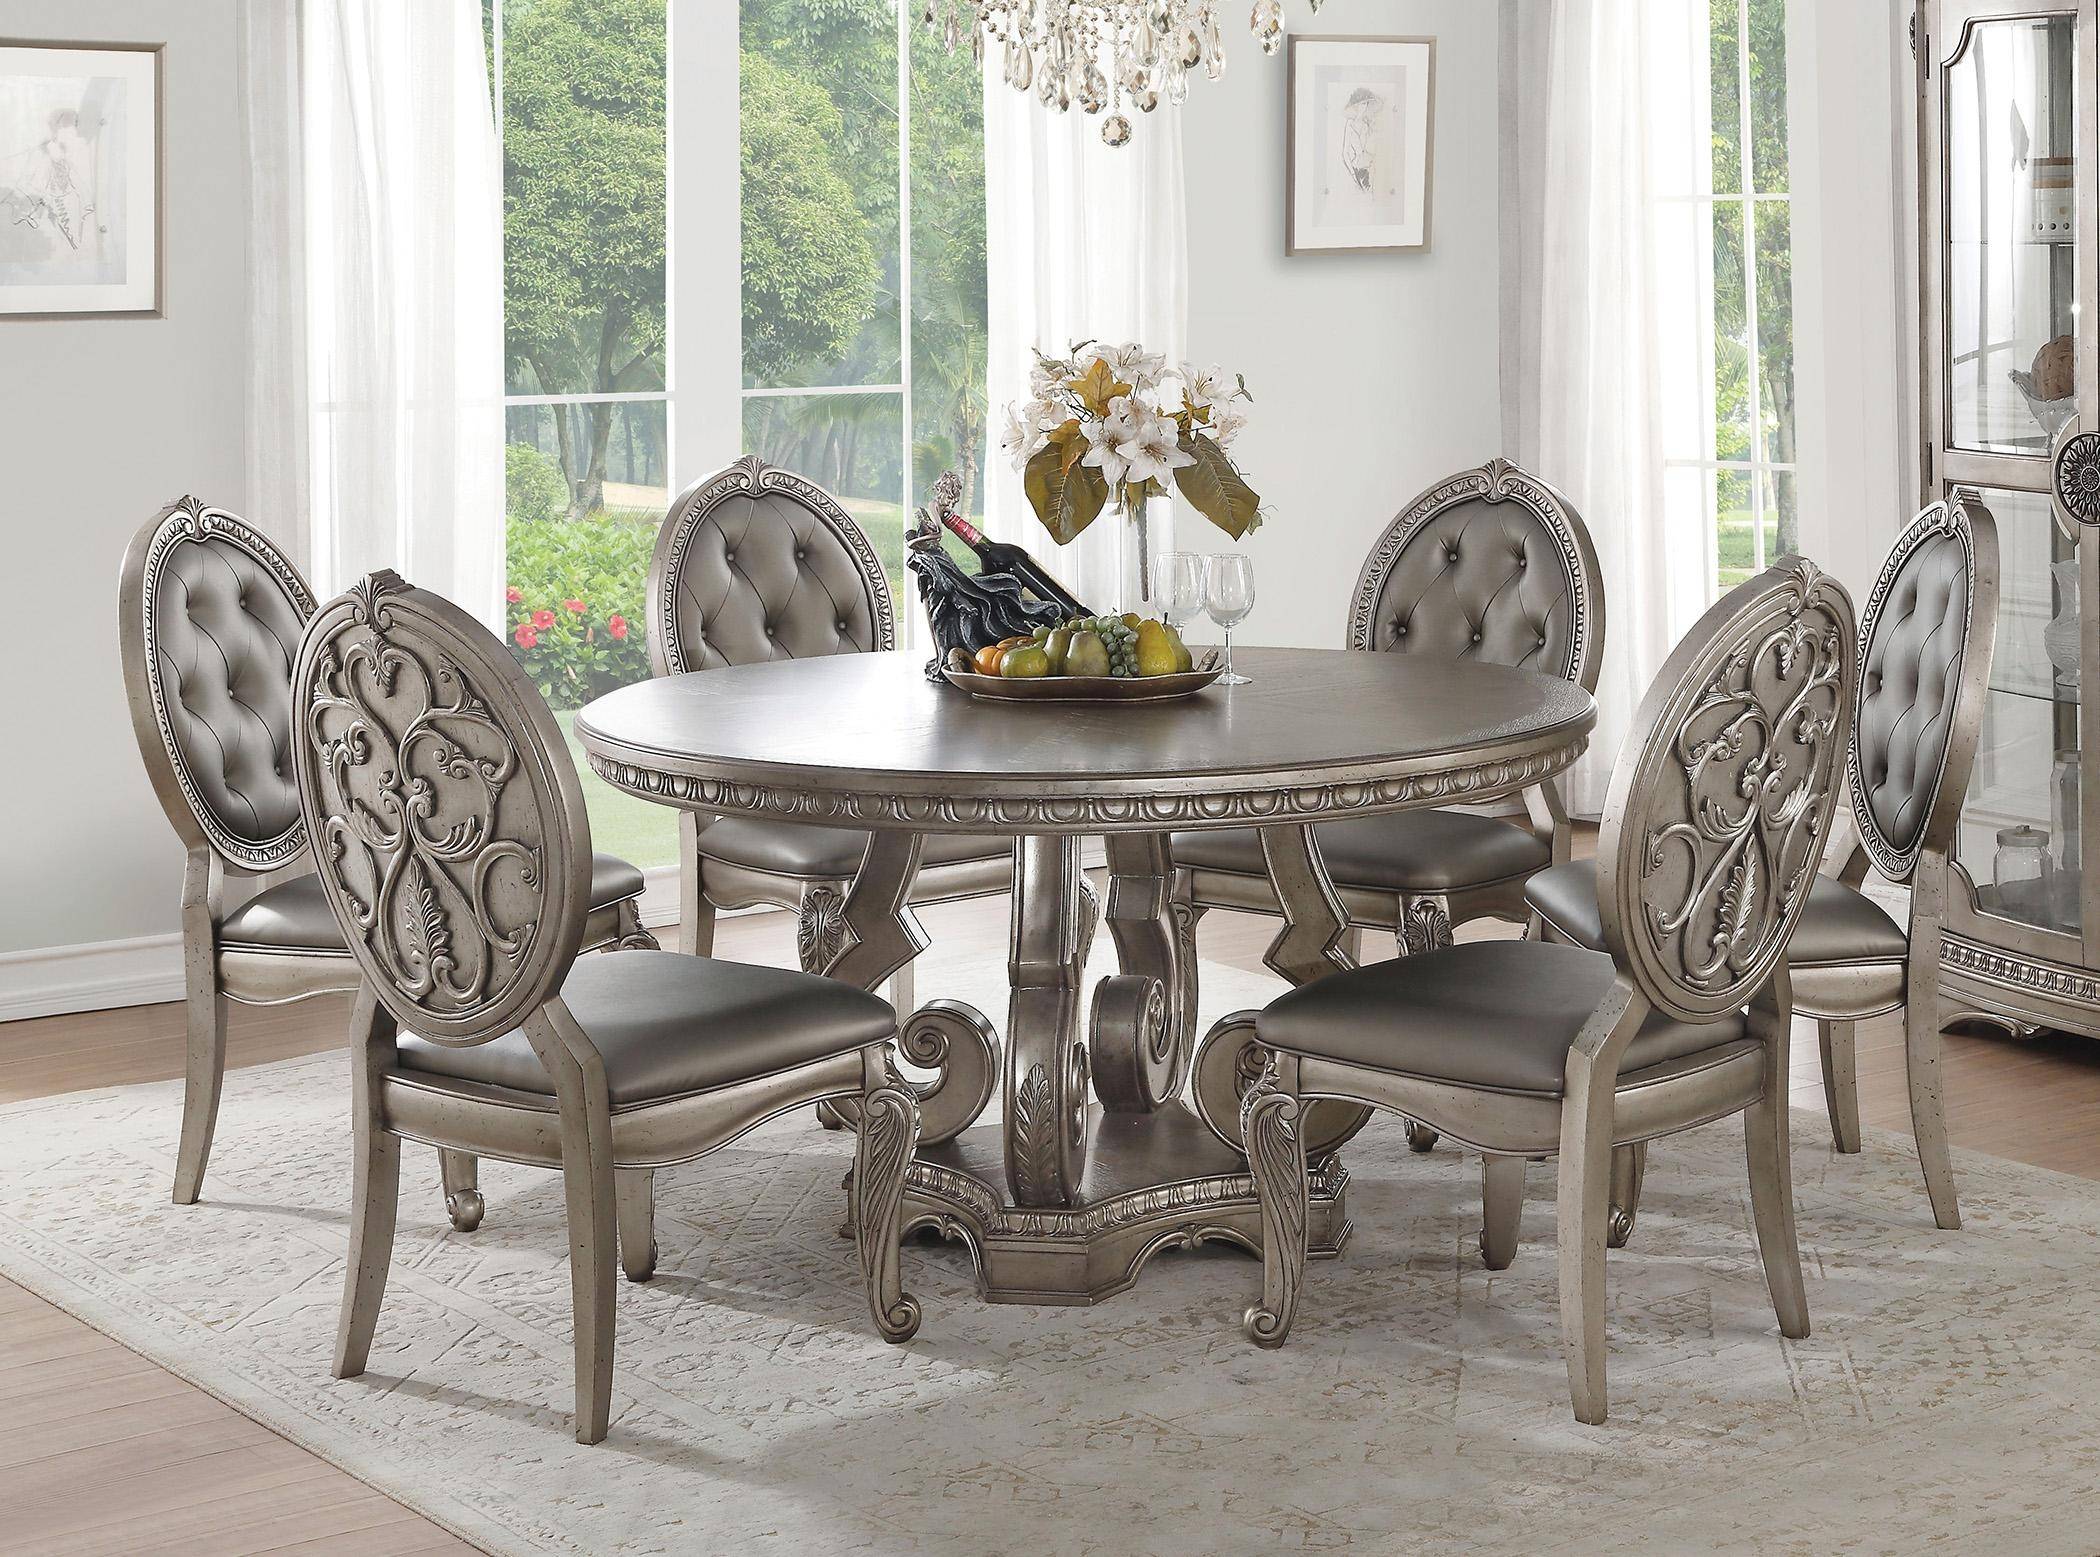 Buy ACME Northville-66915 Dining Table Set 8 Pcs in Antique, Silver